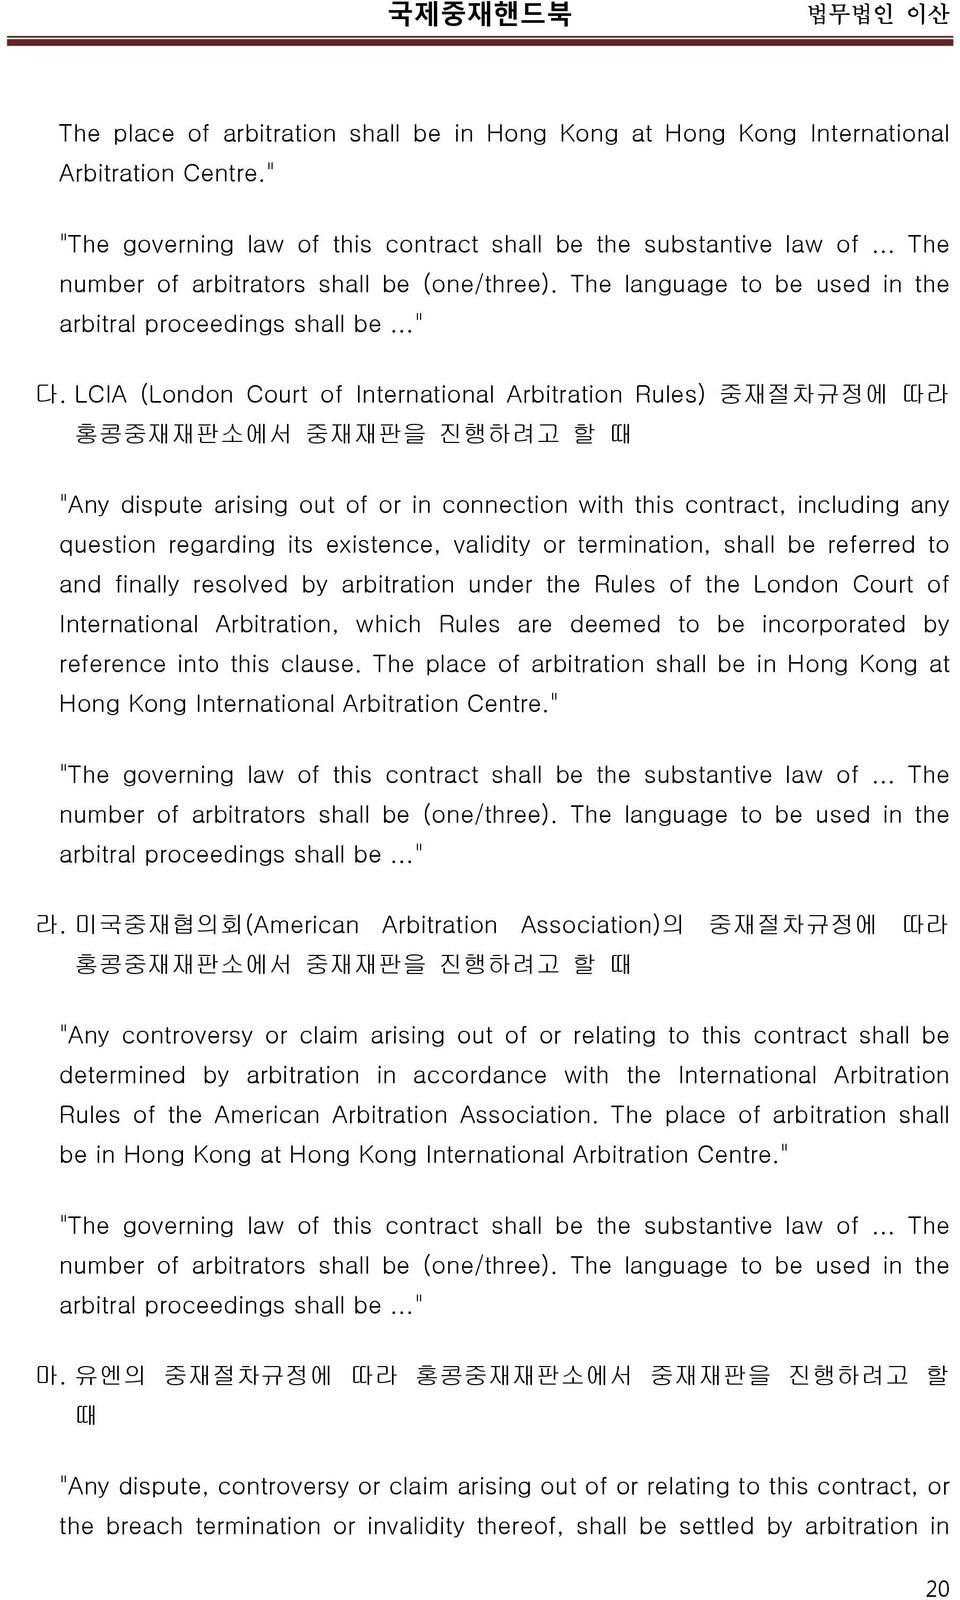 LCIA (London Court of International Arbitration Rules) 중재절차규정에 따라 홍콩중재재판소에서 중재재판을 진행하려고 할 때 "Any dispute arising out of or in connection with this contract, including any question regarding its